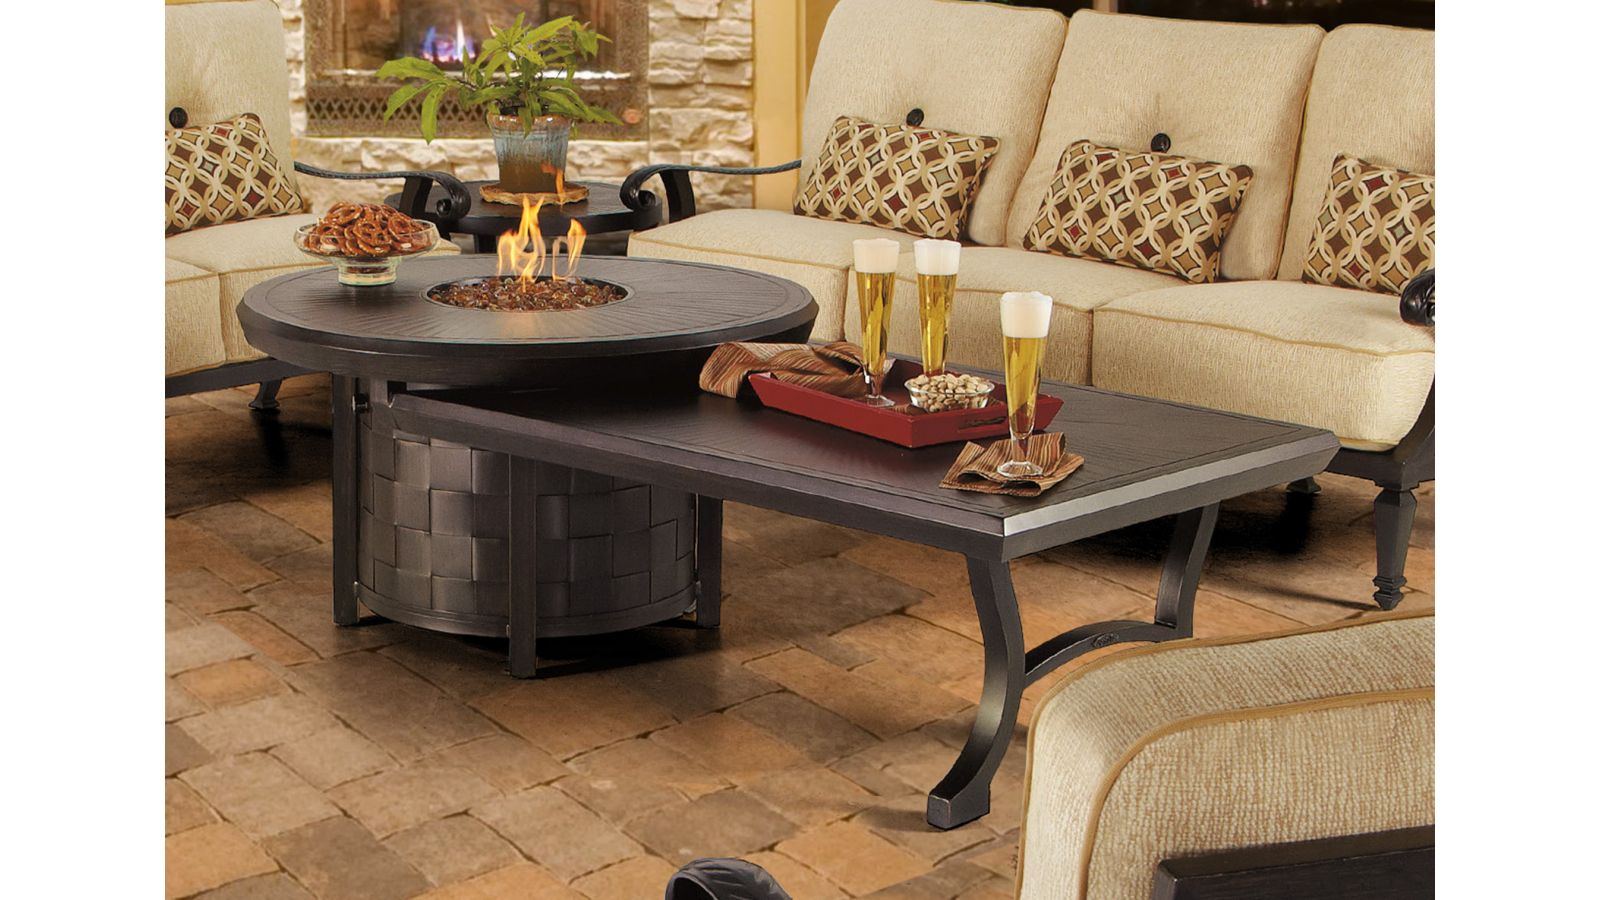 Castelle Fire Pit and Side Table by Pride Family Brands